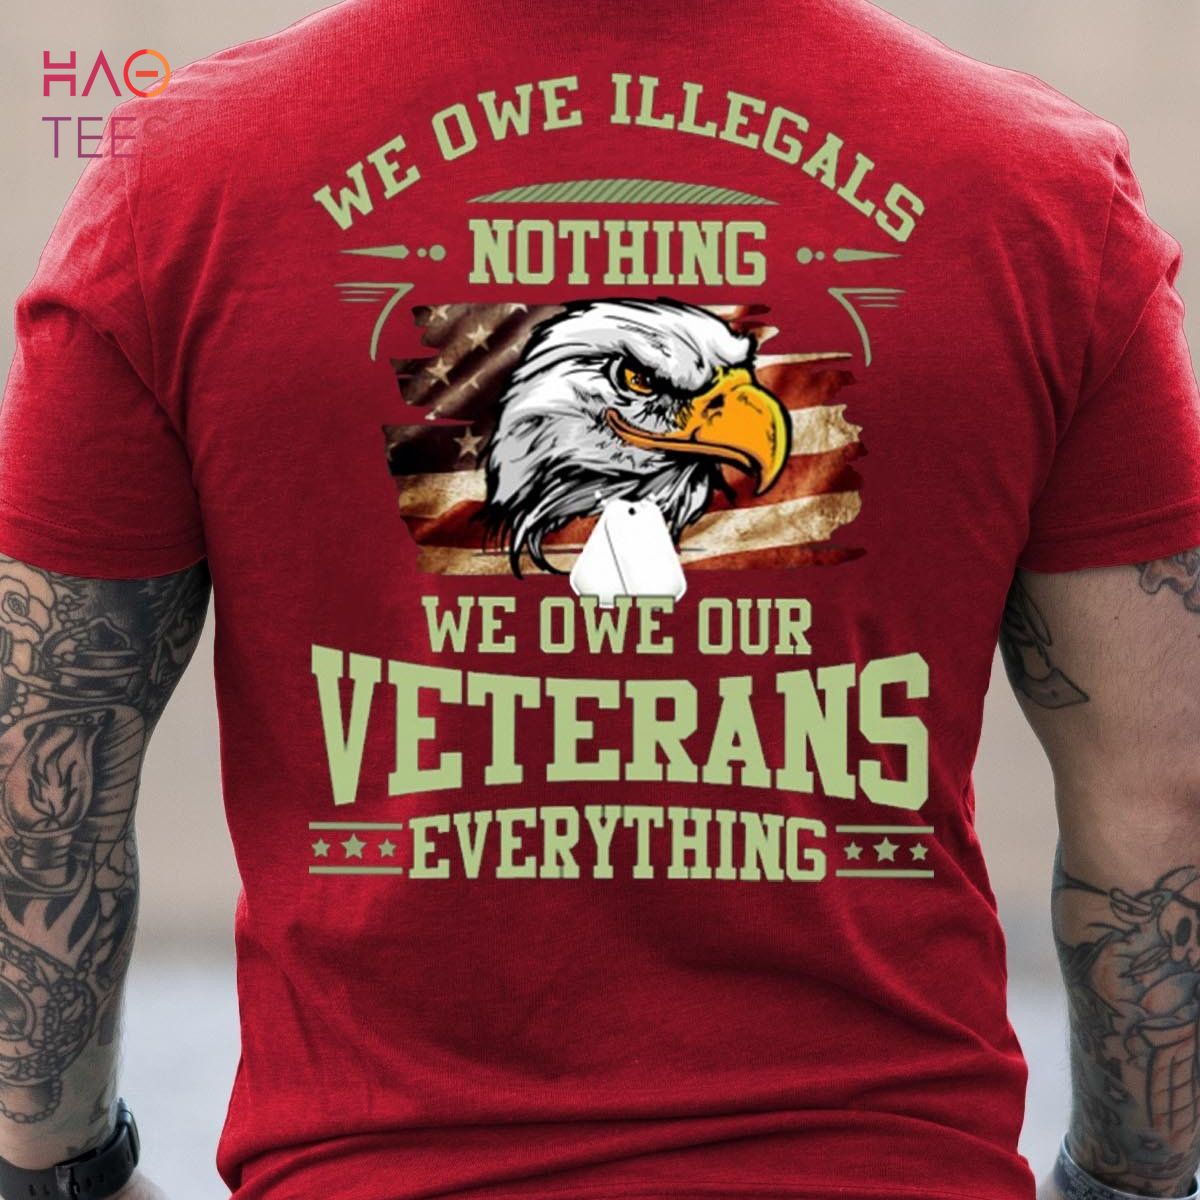 Men's We Owe ILLegals Nothing We Owe Our Veterans Everything Veteran Military Shirt